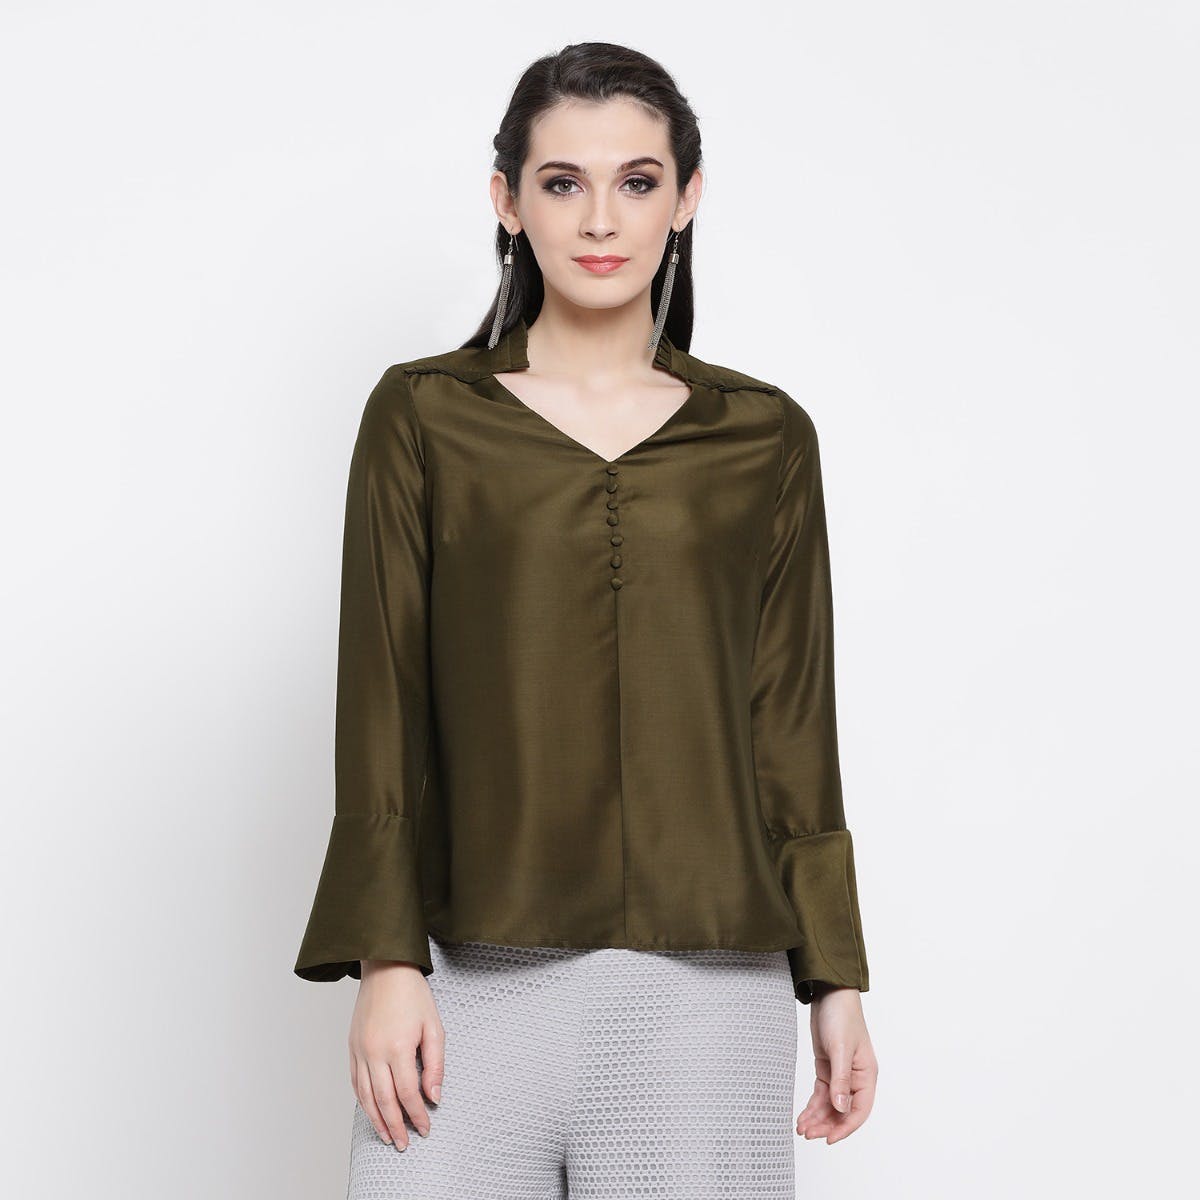 Frill Long Sleeves Top - Olive Green